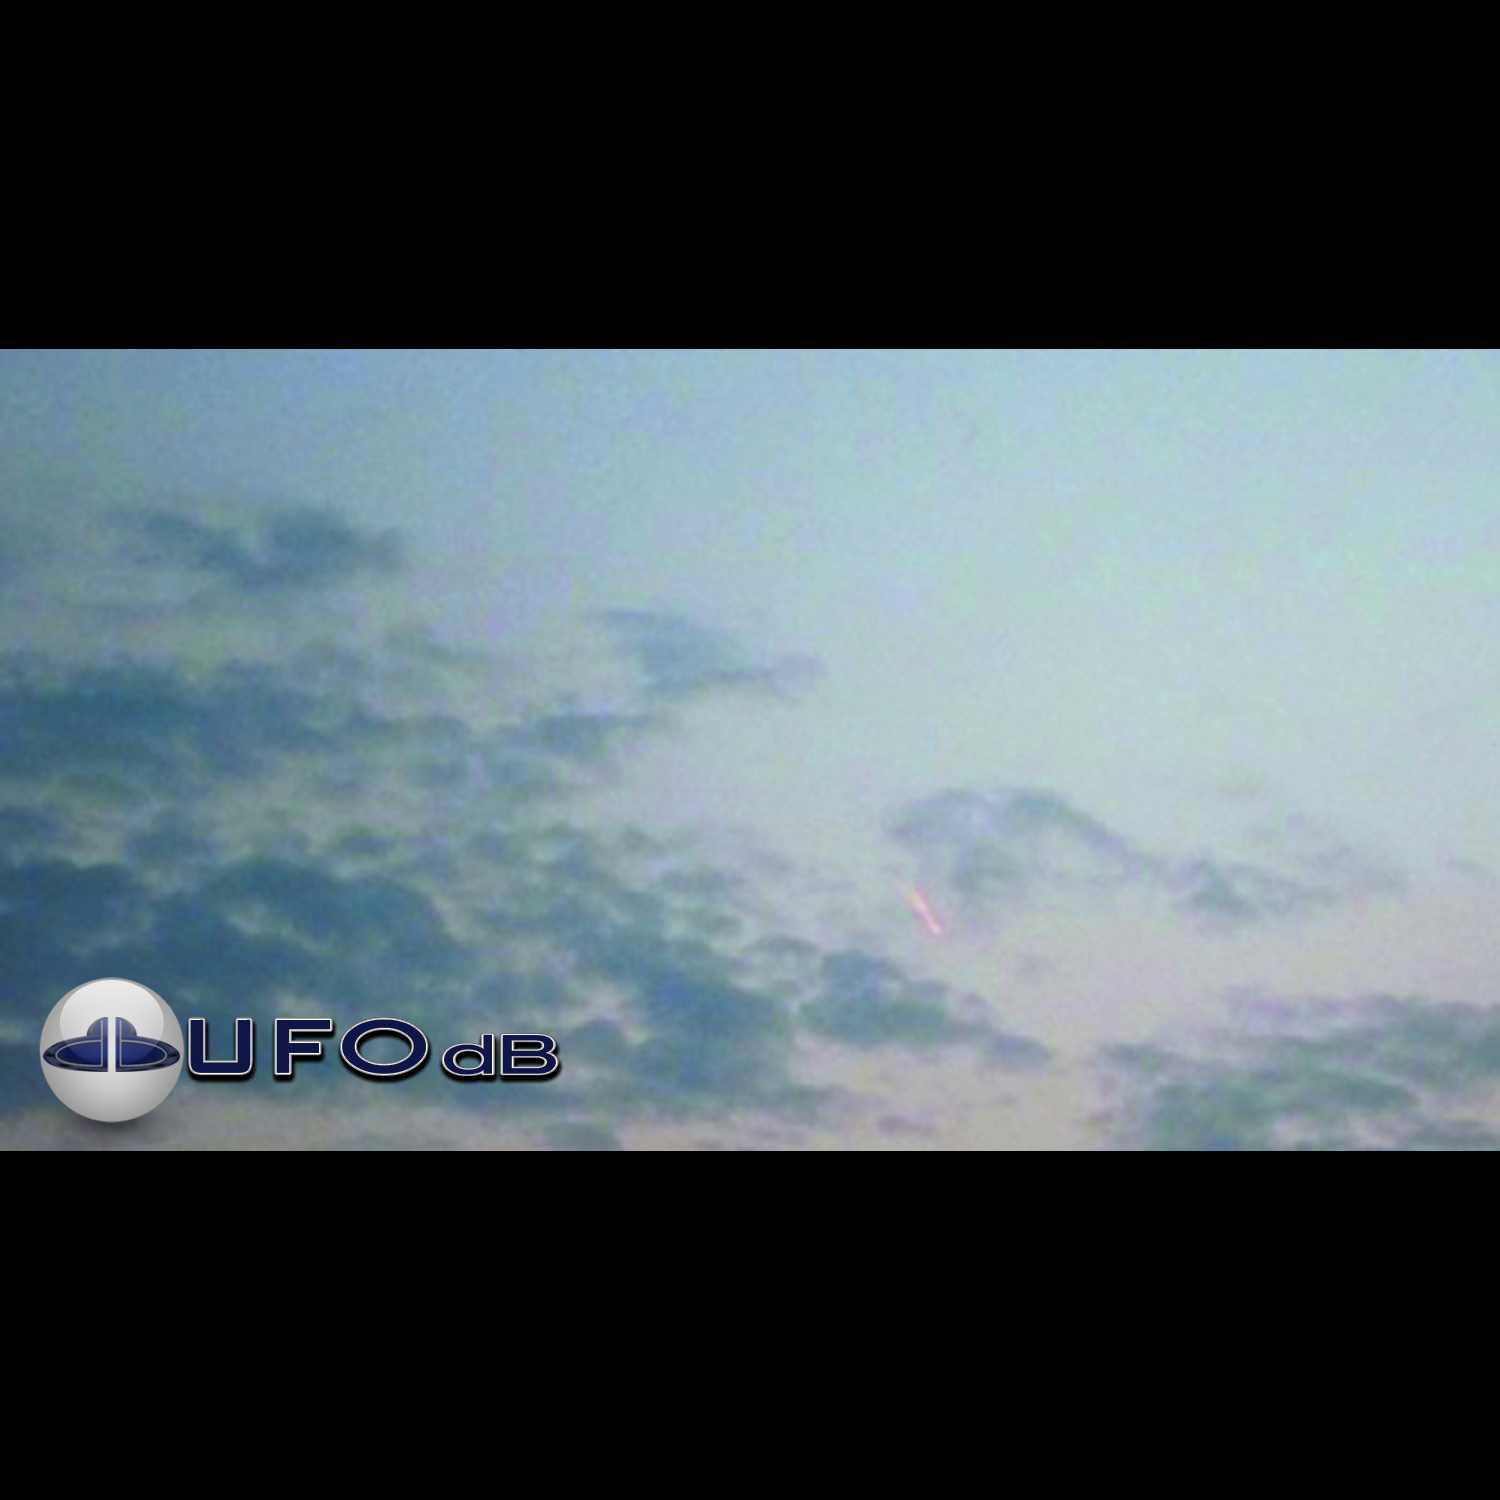 Fire Dragon UFO with glowing tail in clouds over Hefei China | 2011 UFO Picture #234-1